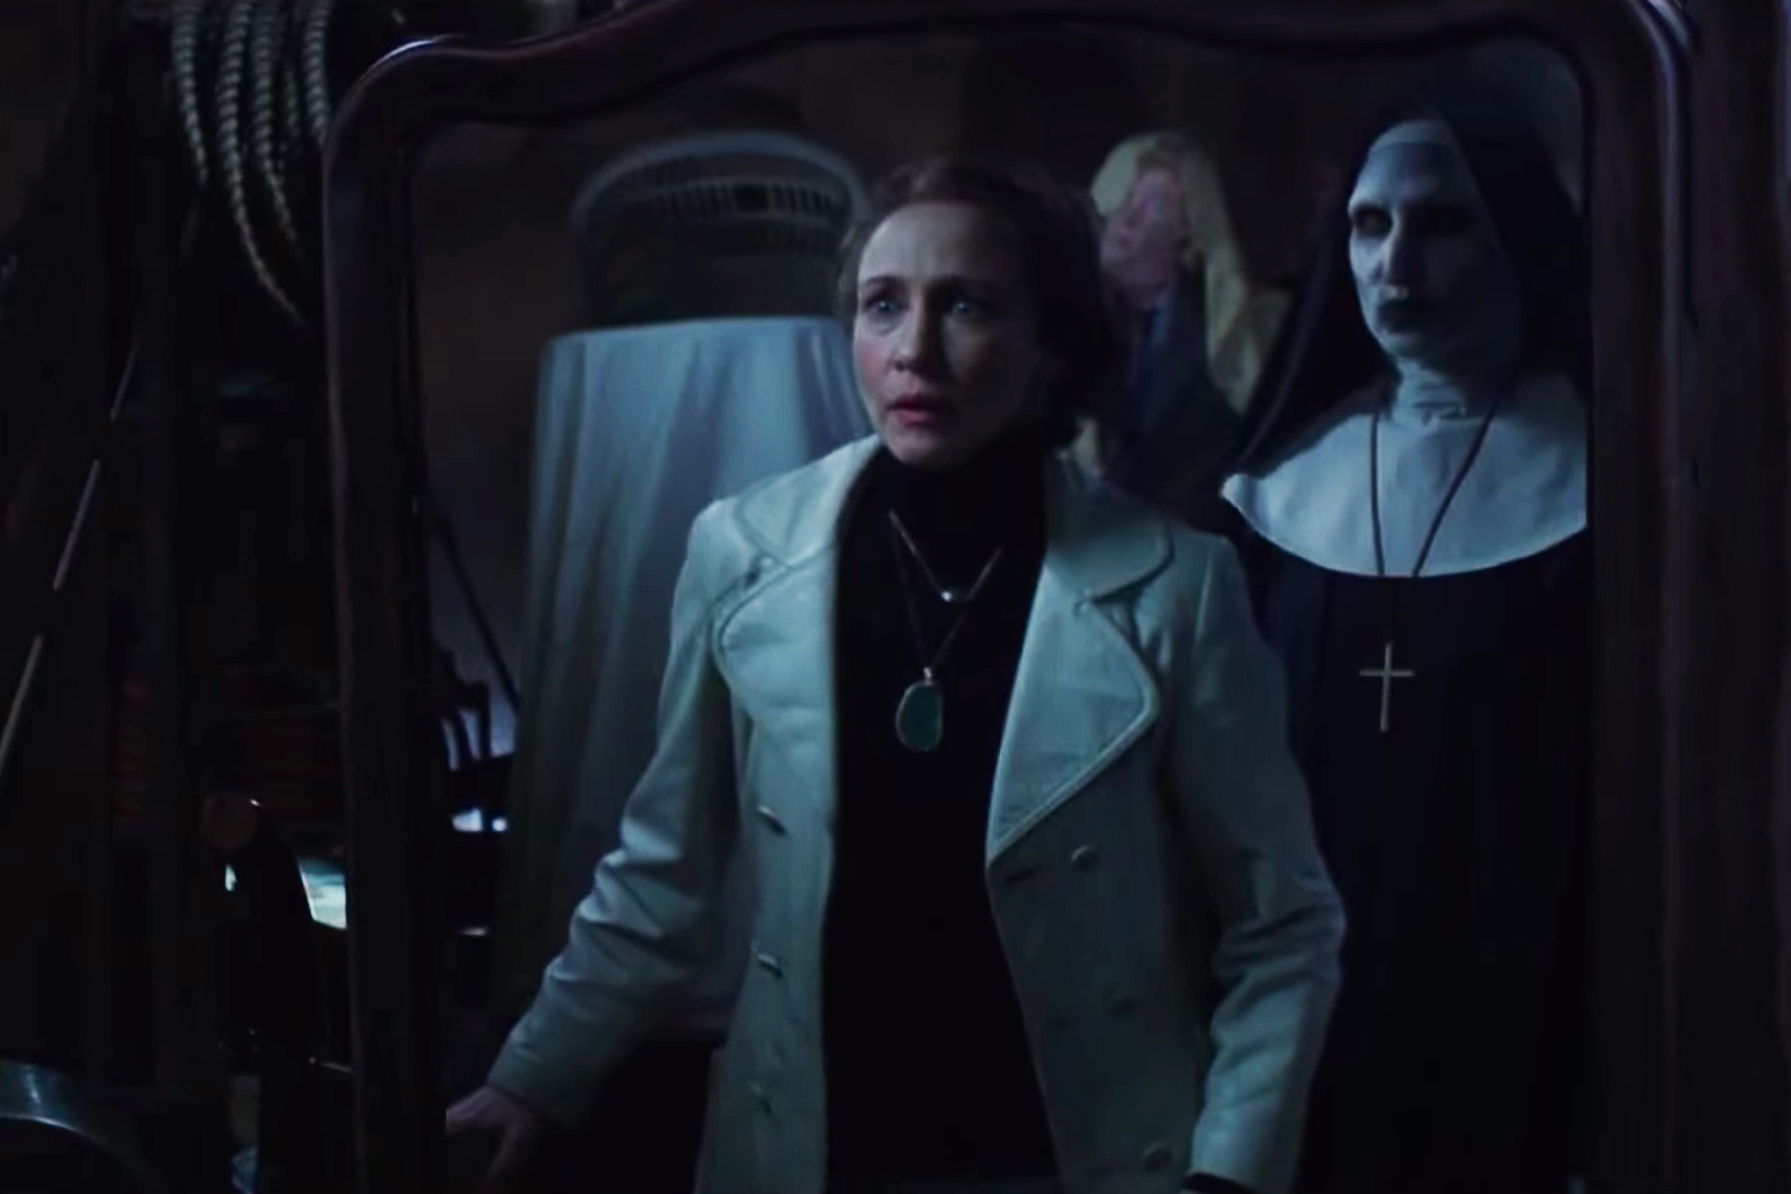 download the conjuring 2 full movie hd